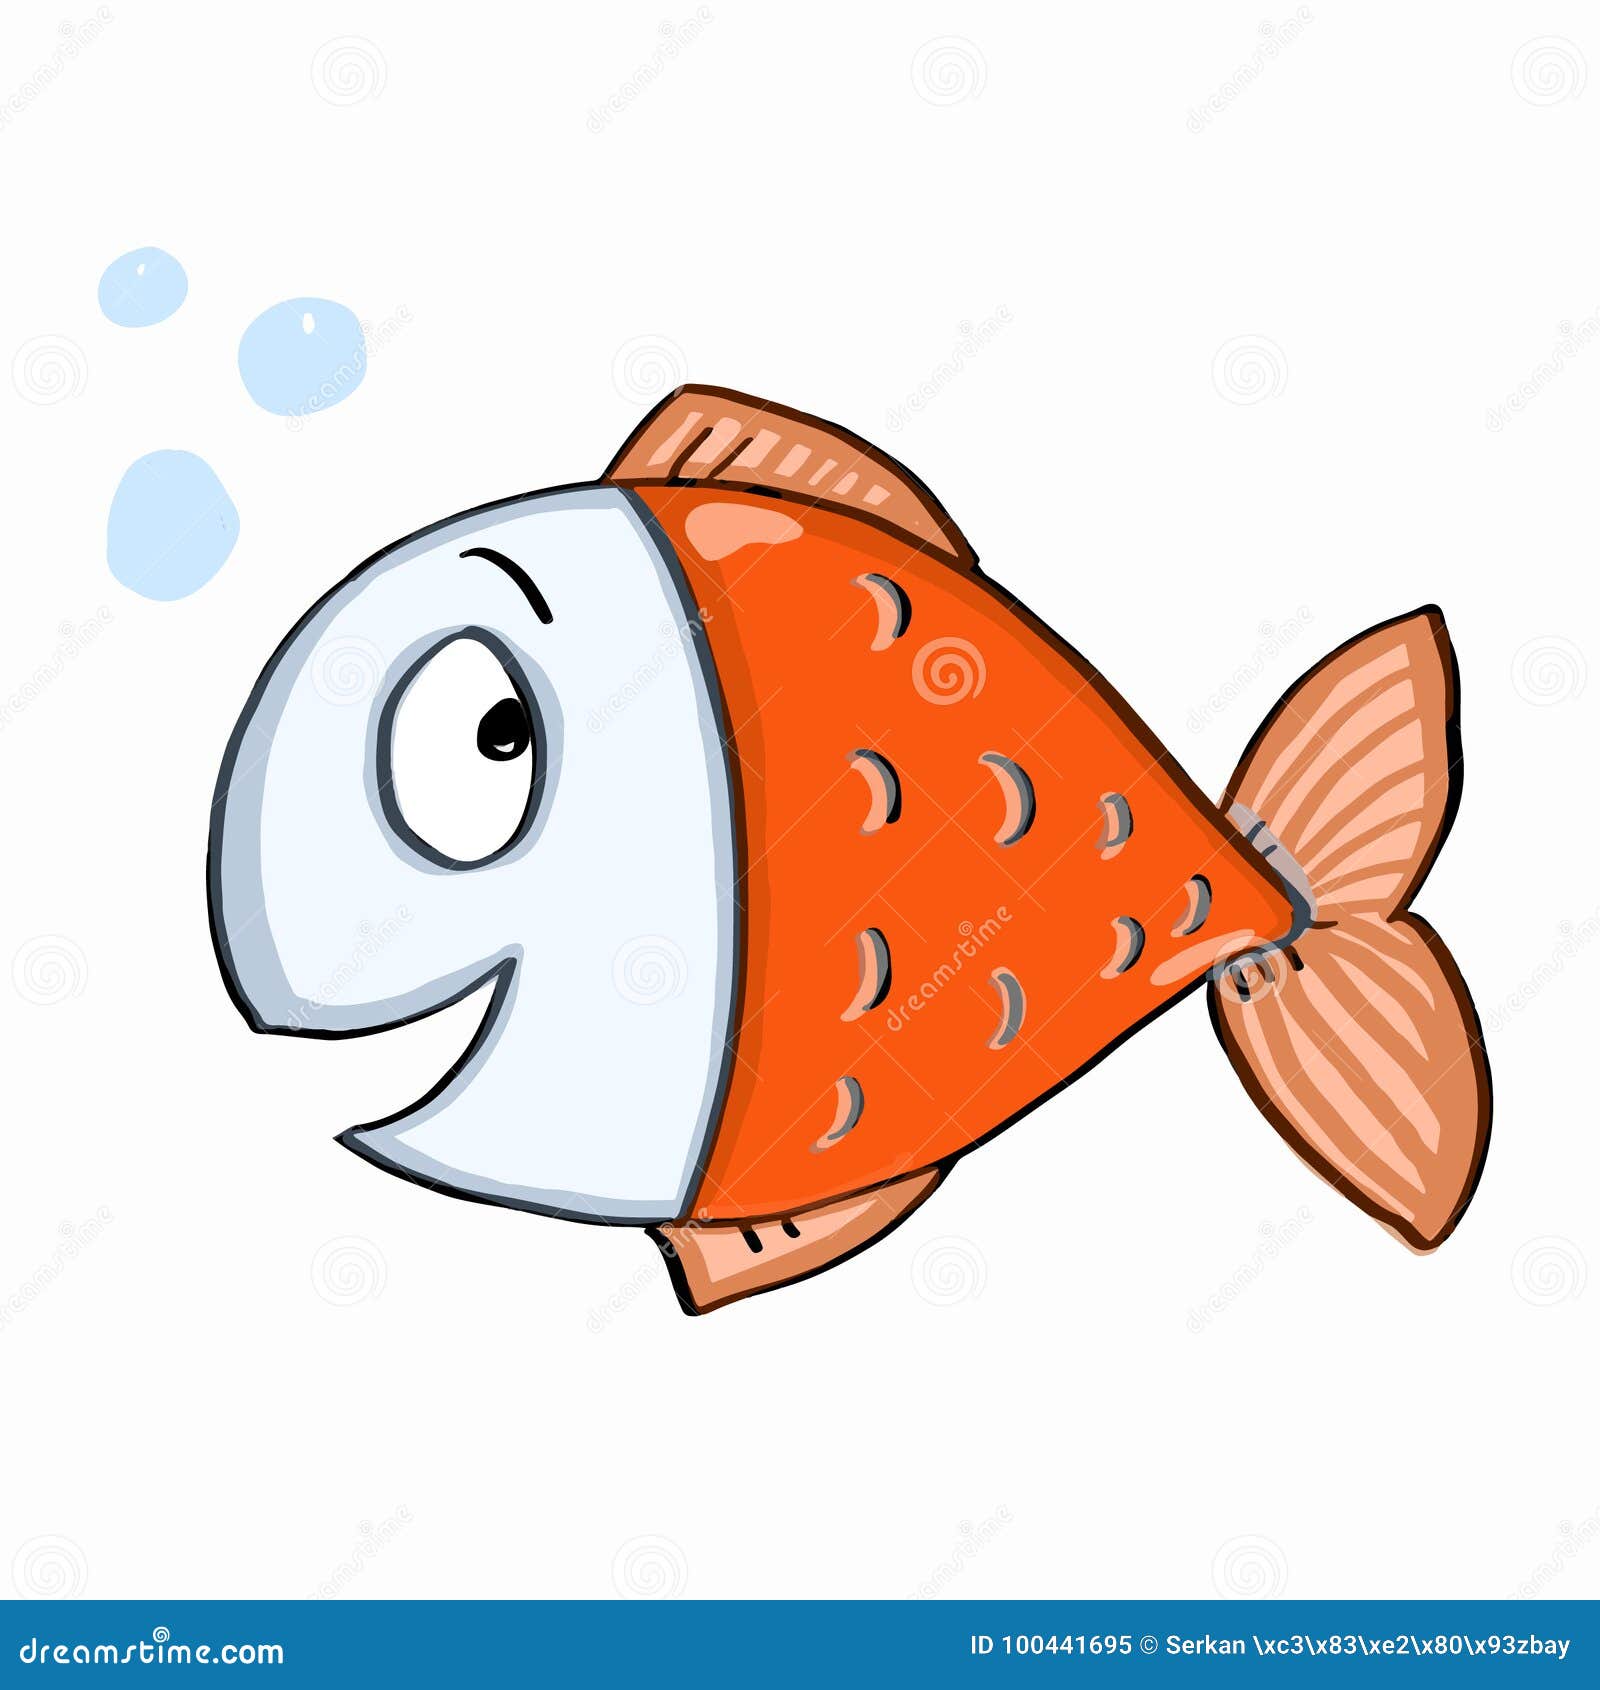 Fish coloring pages to print - Pisces Kids Coloring Pages